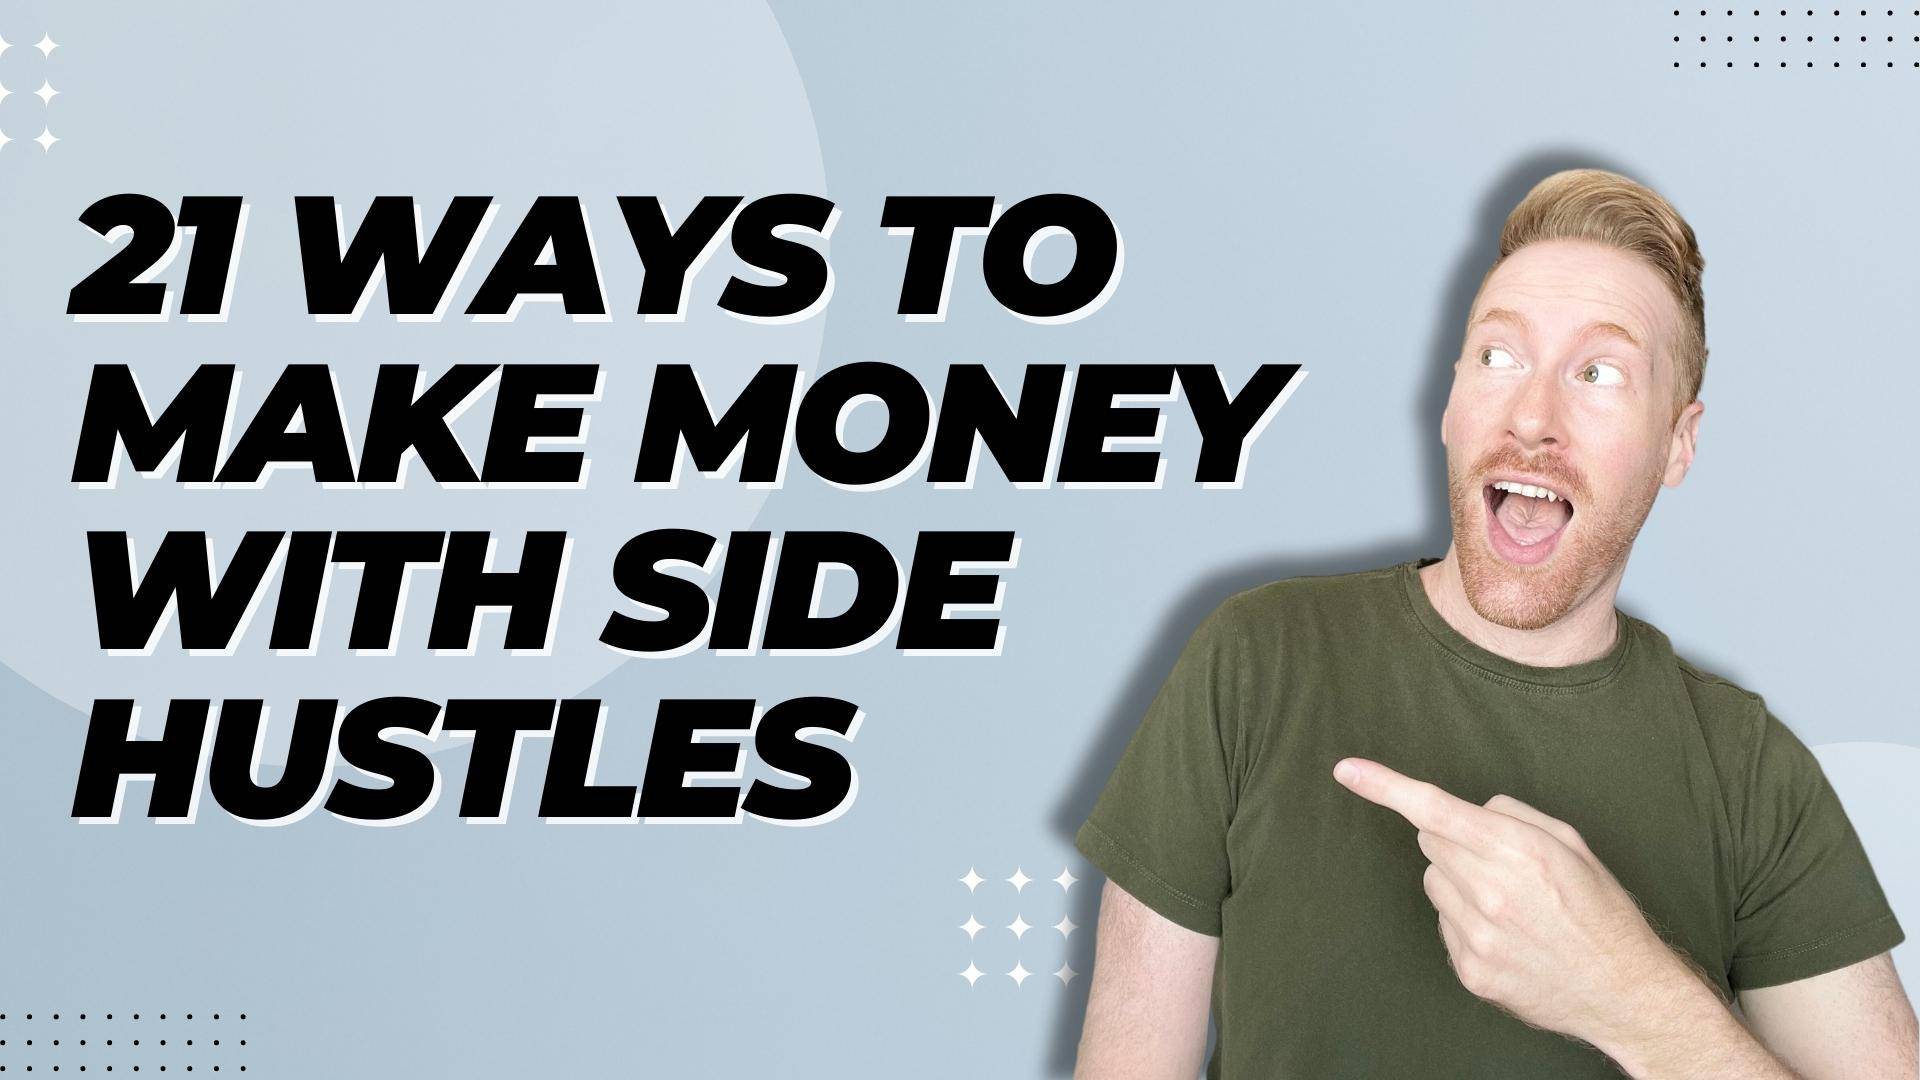 21 Ways to Make Money with Side Hustles